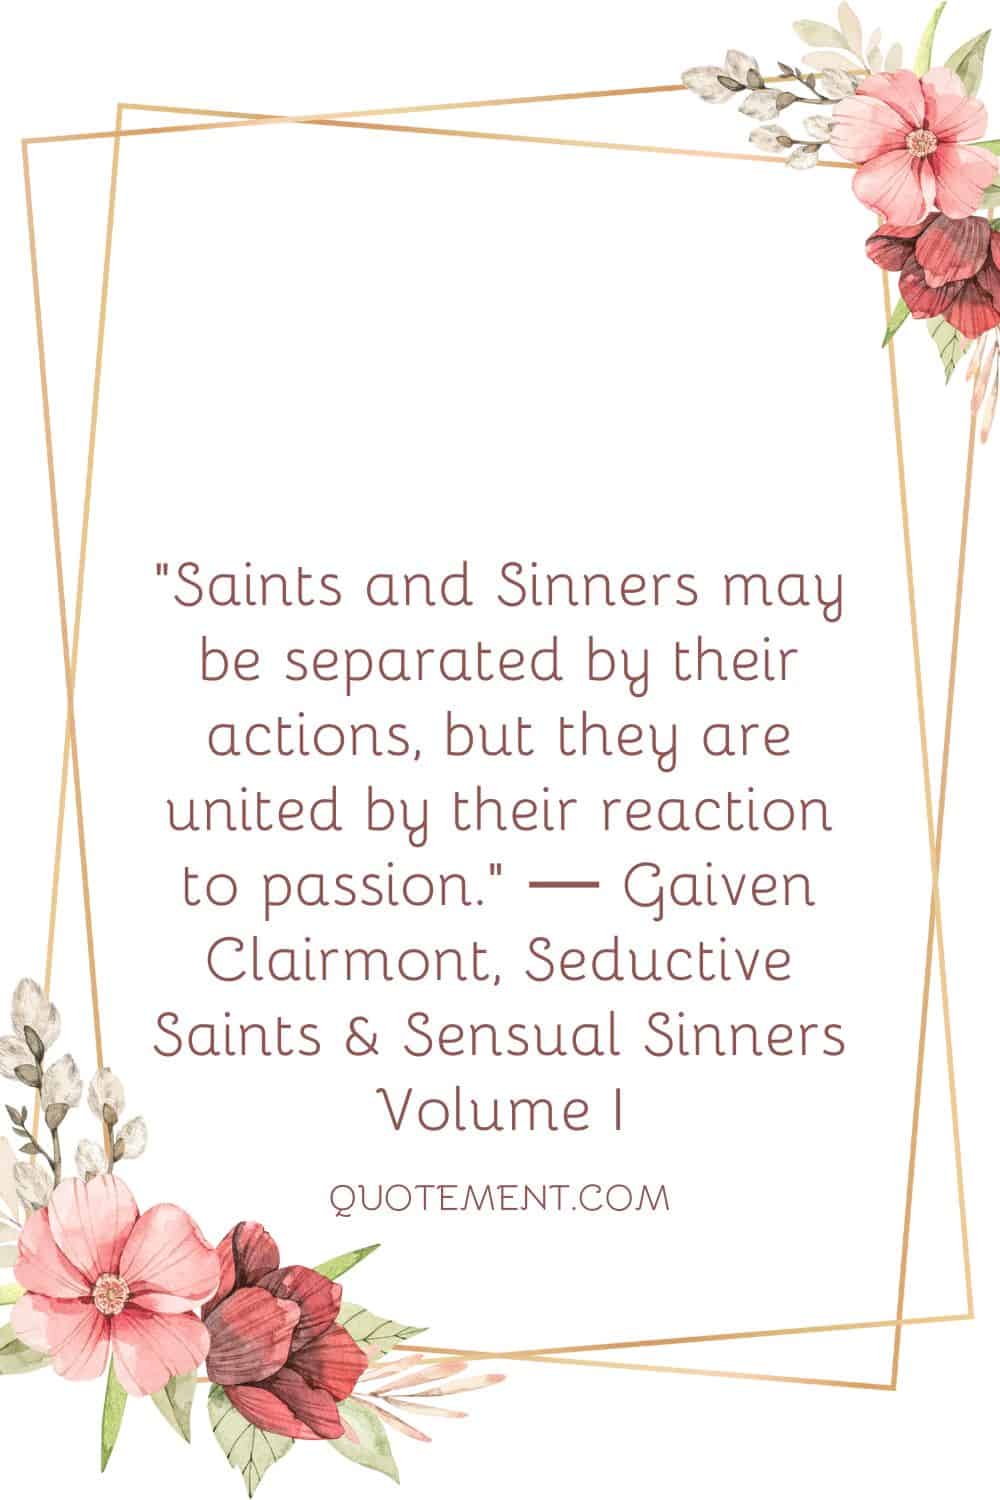 Saints and Sinners may be separated by their actions, but they are united by their reaction to passion.